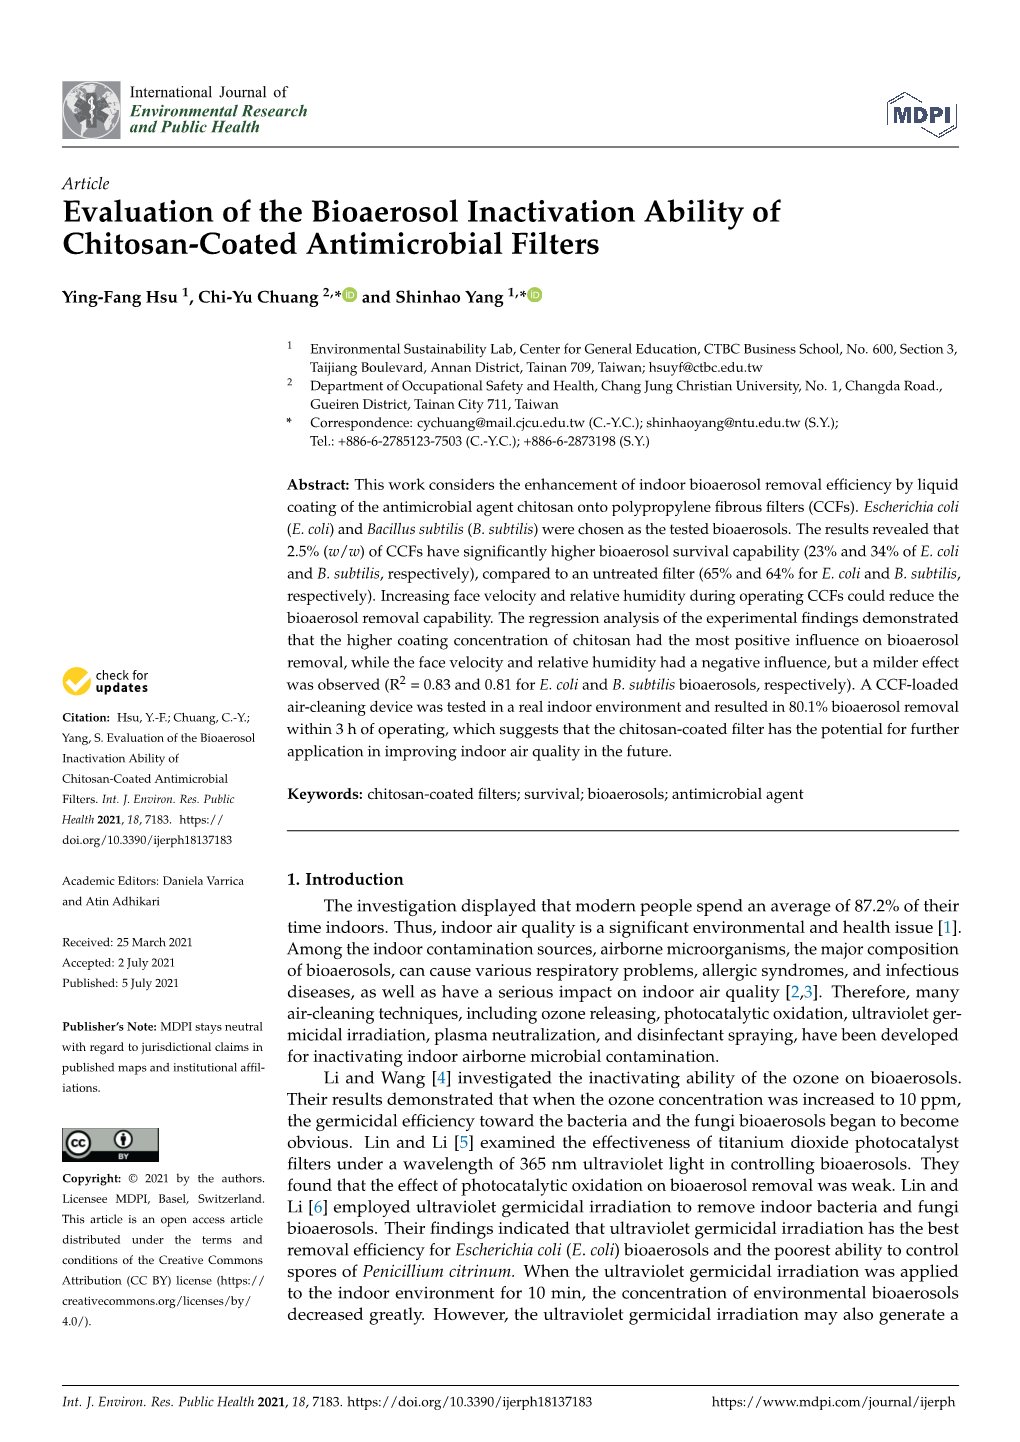 Evaluation of the Bioaerosol Inactivation Ability of Chitosan-Coated Antimicrobial Filters